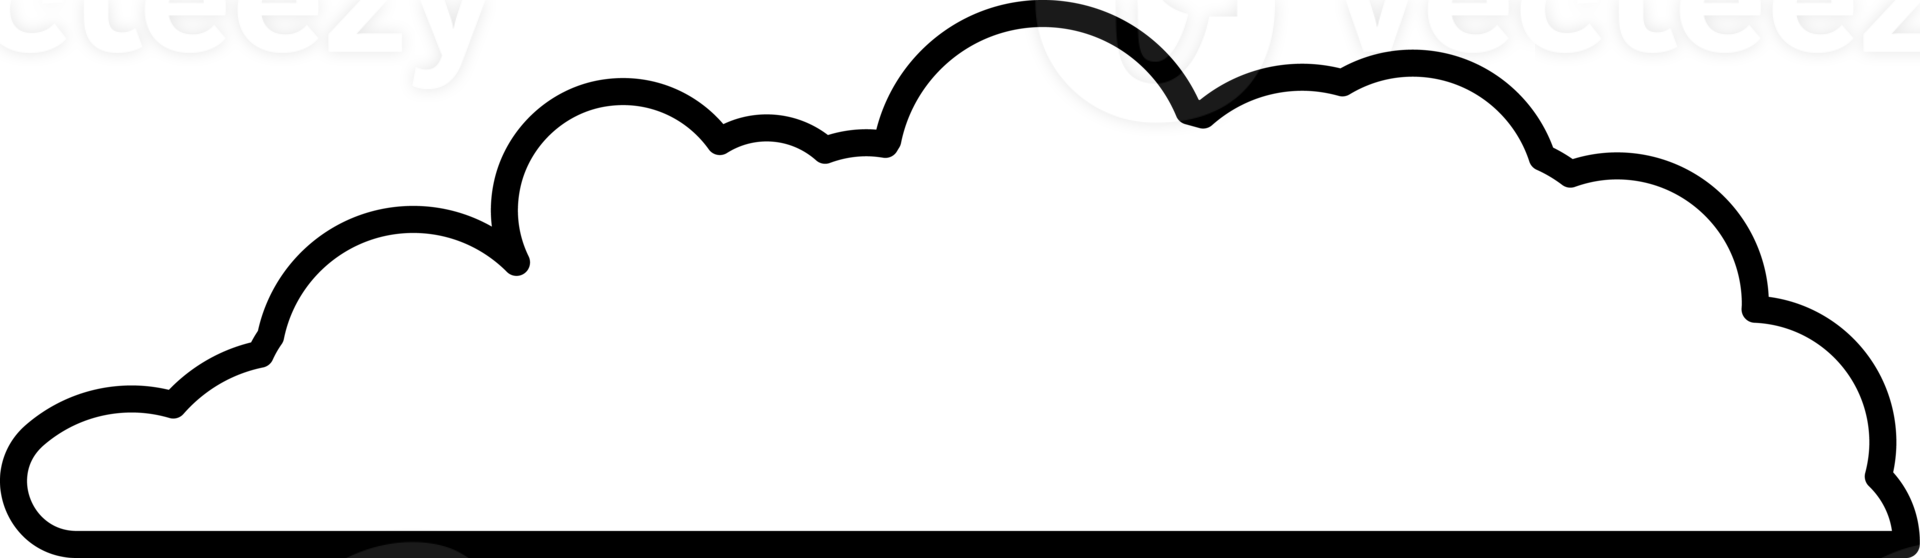 Cloud element in PNG type. Flat illustration style. Minimal object.